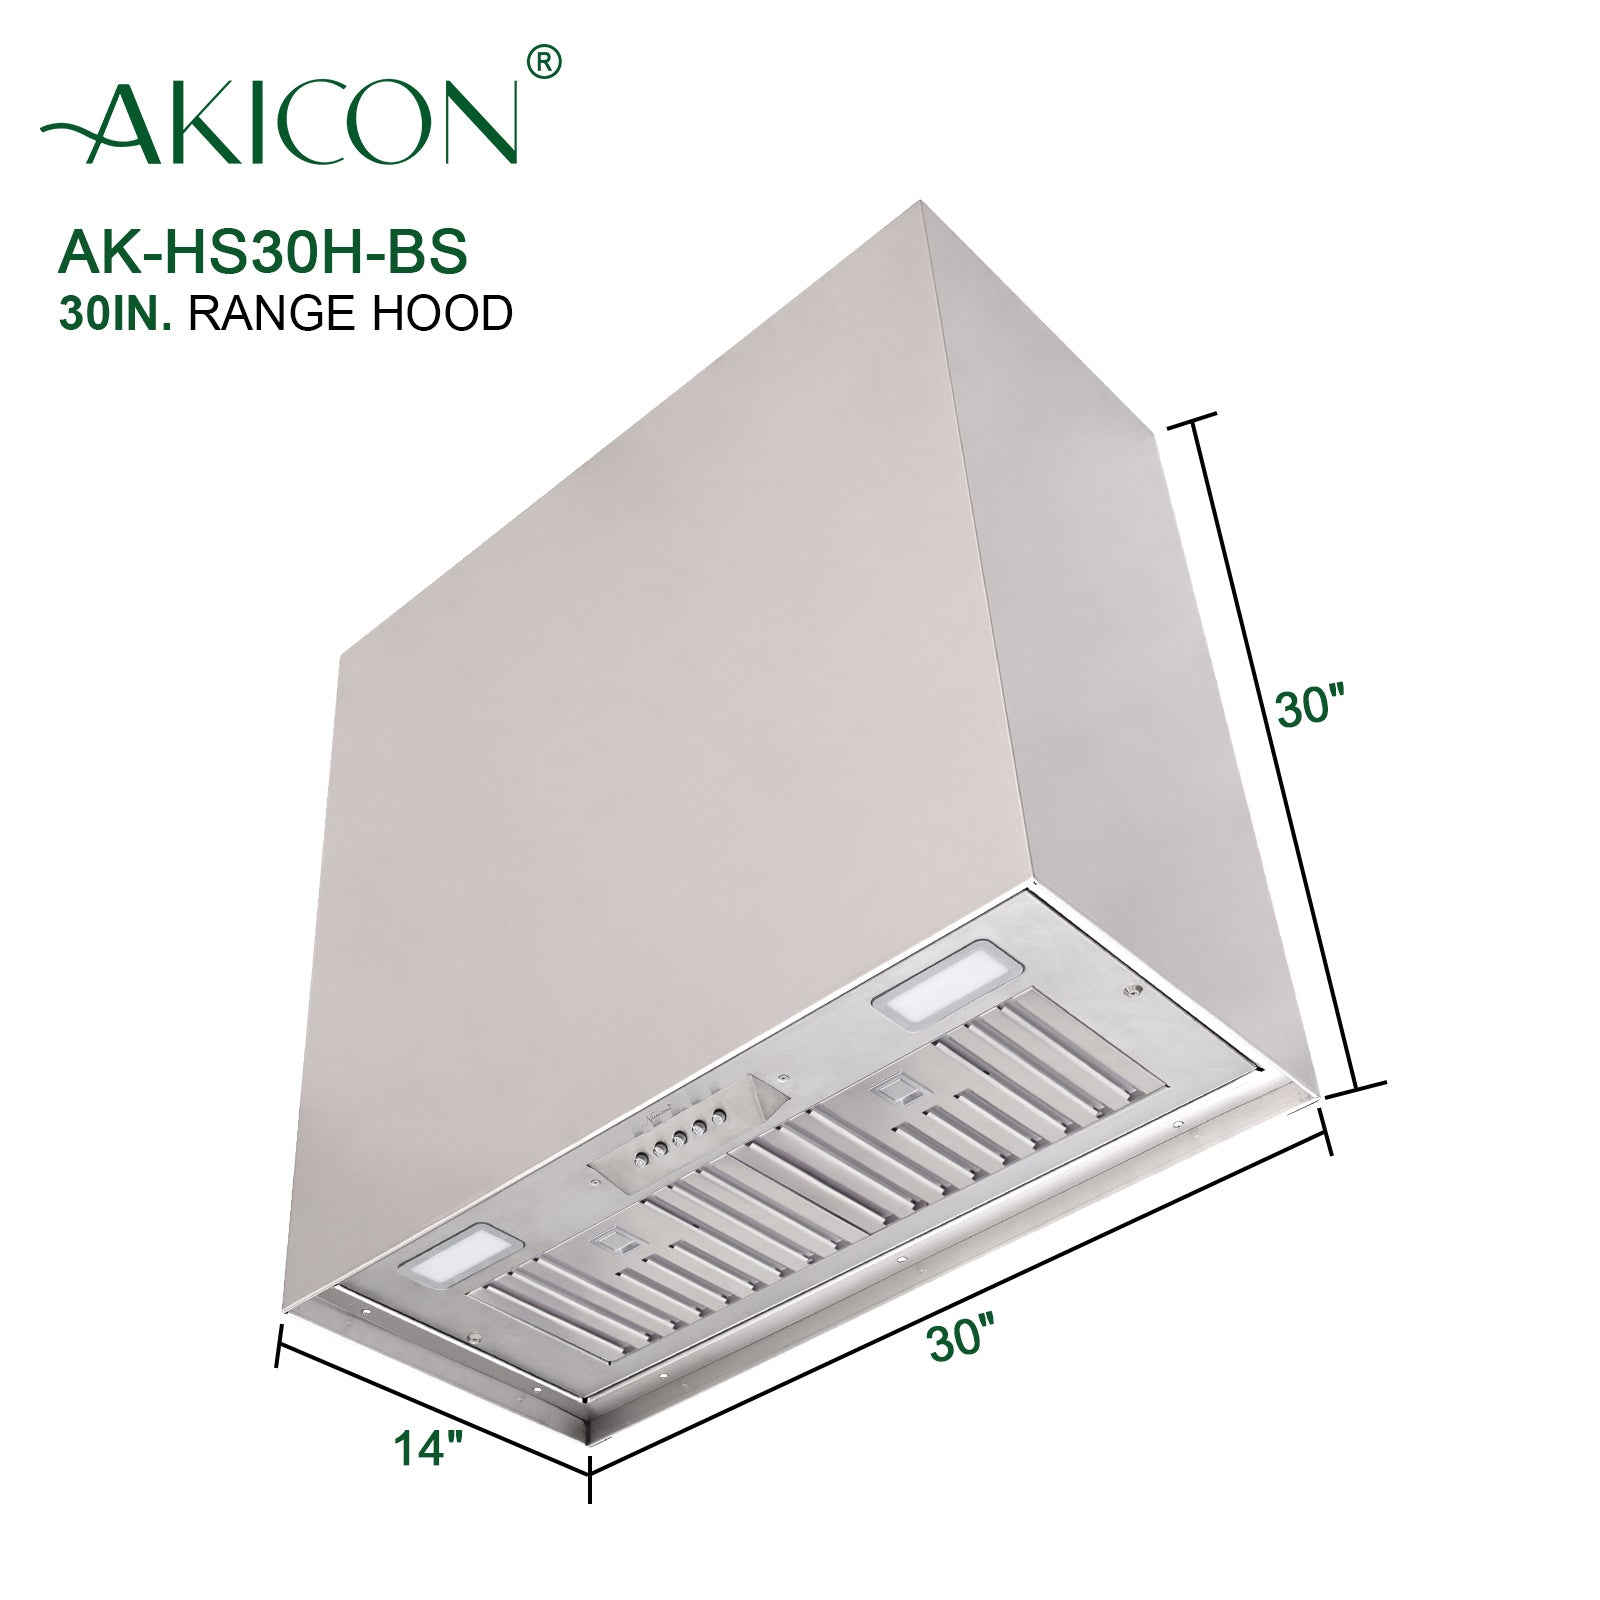 Akicon 30" Stainless Steel Range Hood, Modern Box Kitchen Hood with Powerful Vent Motor, Wall Mount, 30”W*30”H*14"D, Brushed Stainless